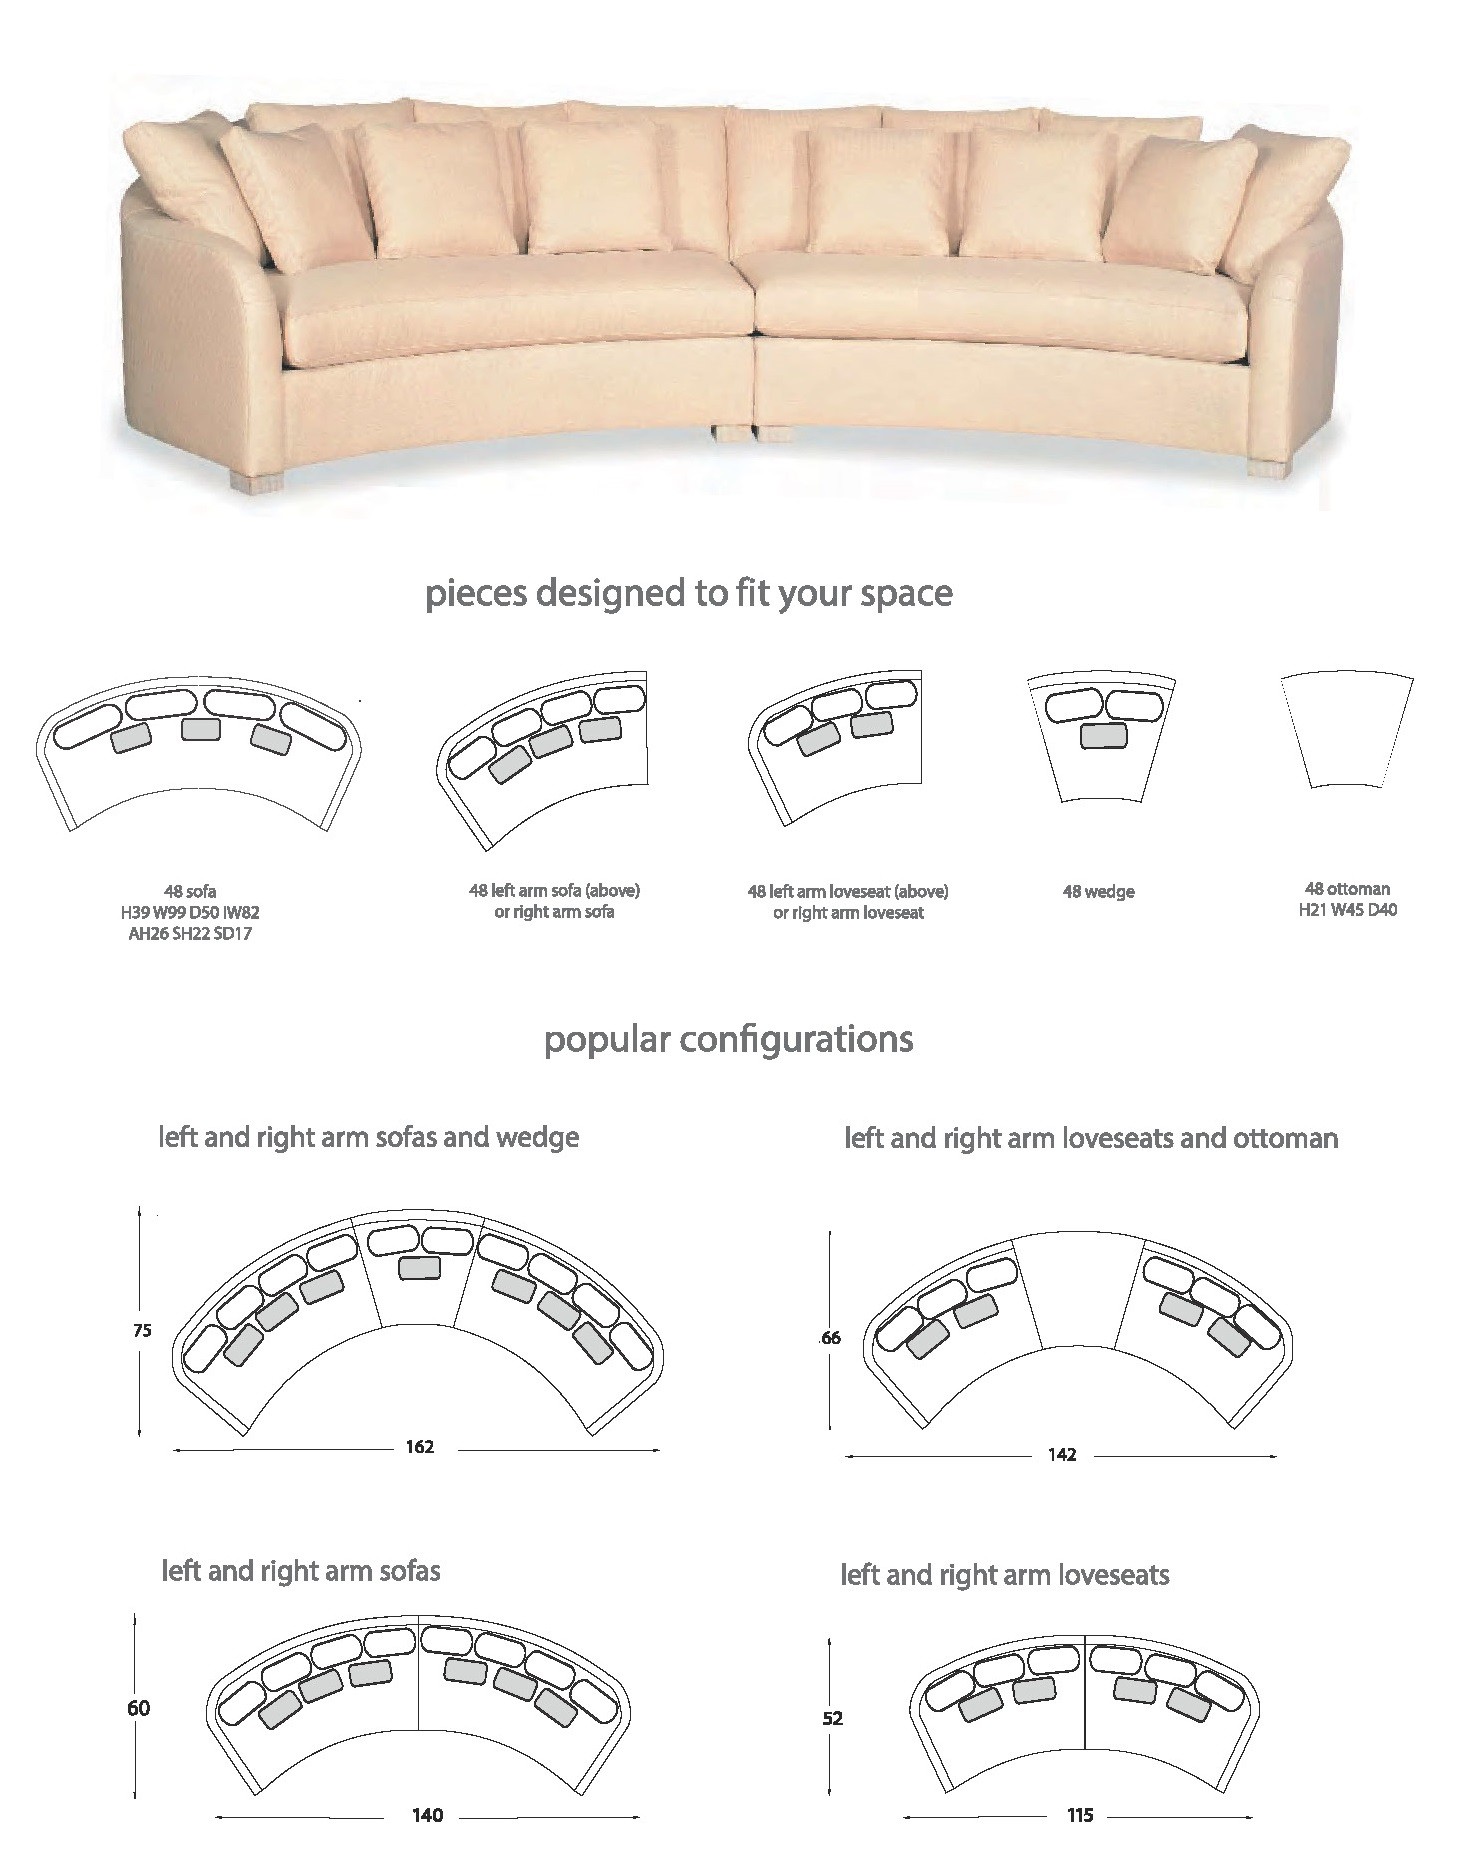 SECTIONALS - Leather & High End Upholstered Furniture Sectional sofa custom configurations 14